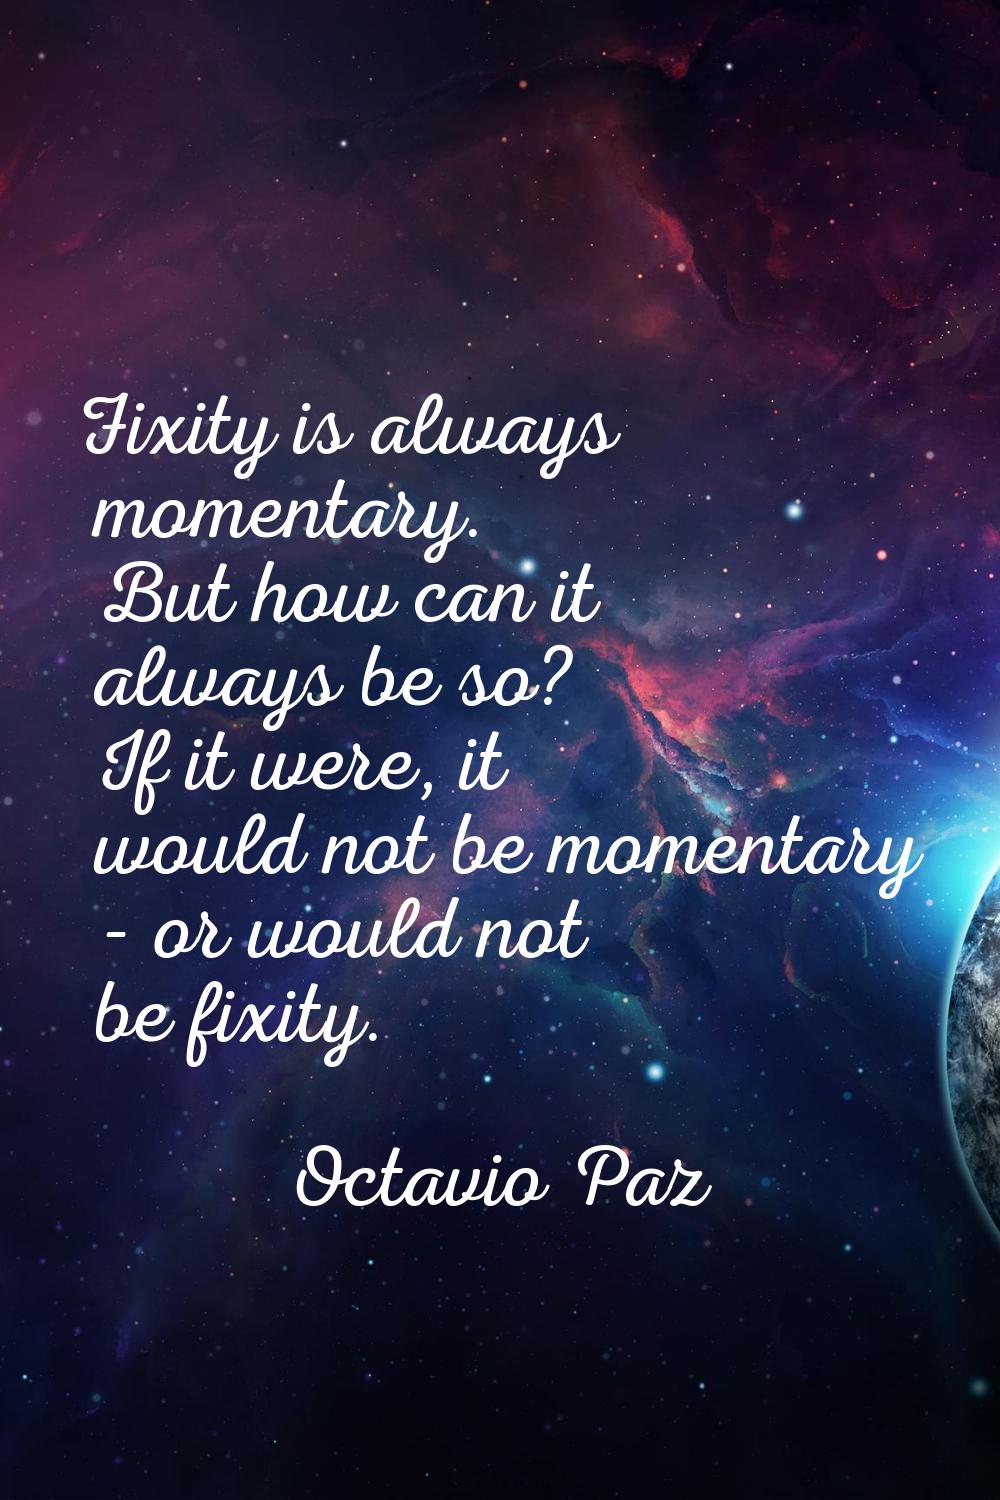 Fixity is always momentary. But how can it always be so? If it were, it would not be momentary - or